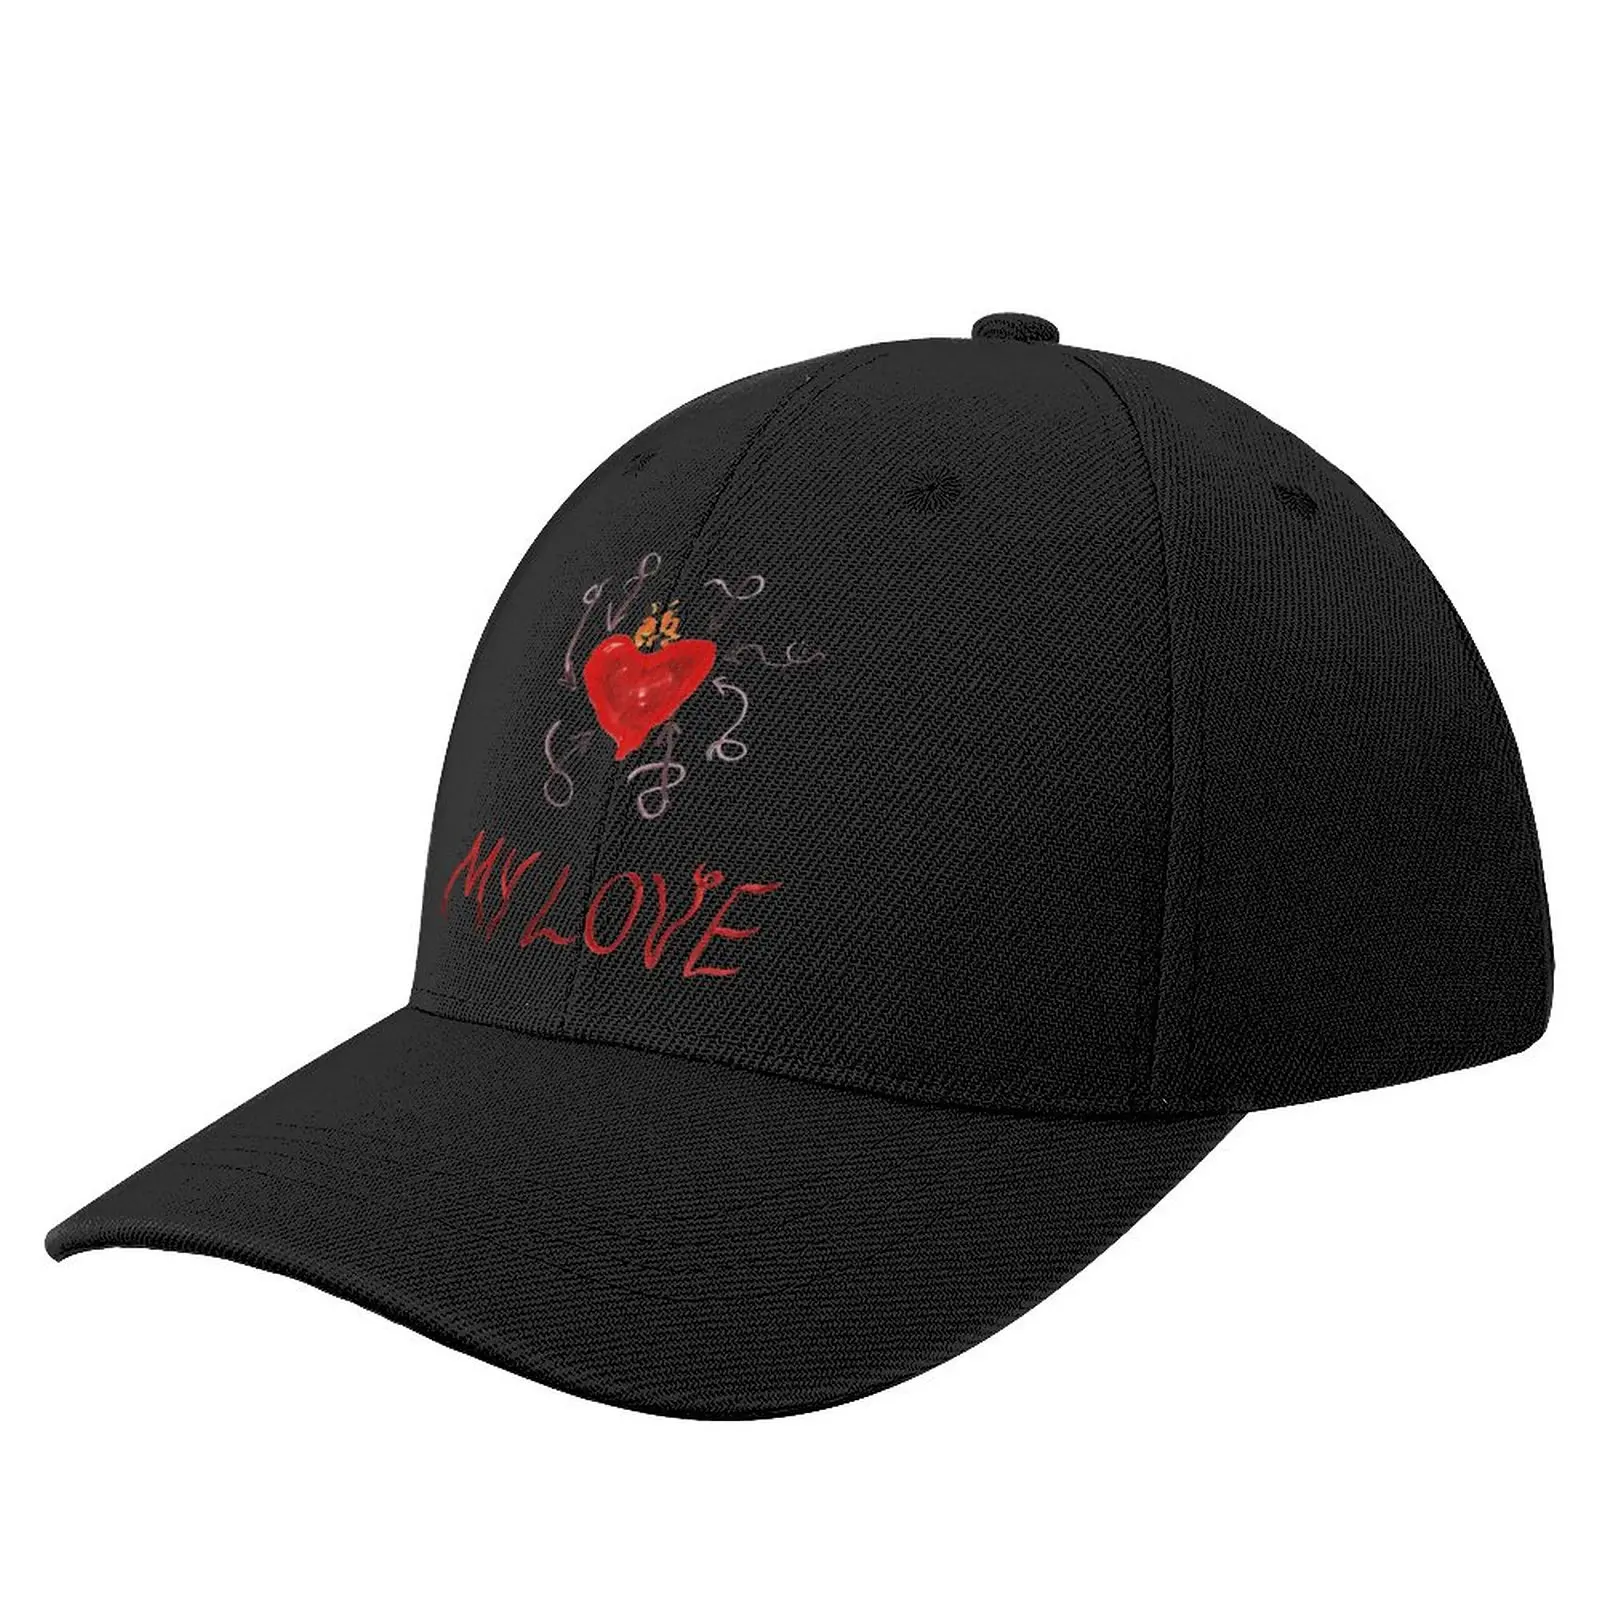 

Florence And The Machine - Dance Fever My Love Baseball Cap Beach Beach Outing Icon Trucker Hat Hat For Women Men's